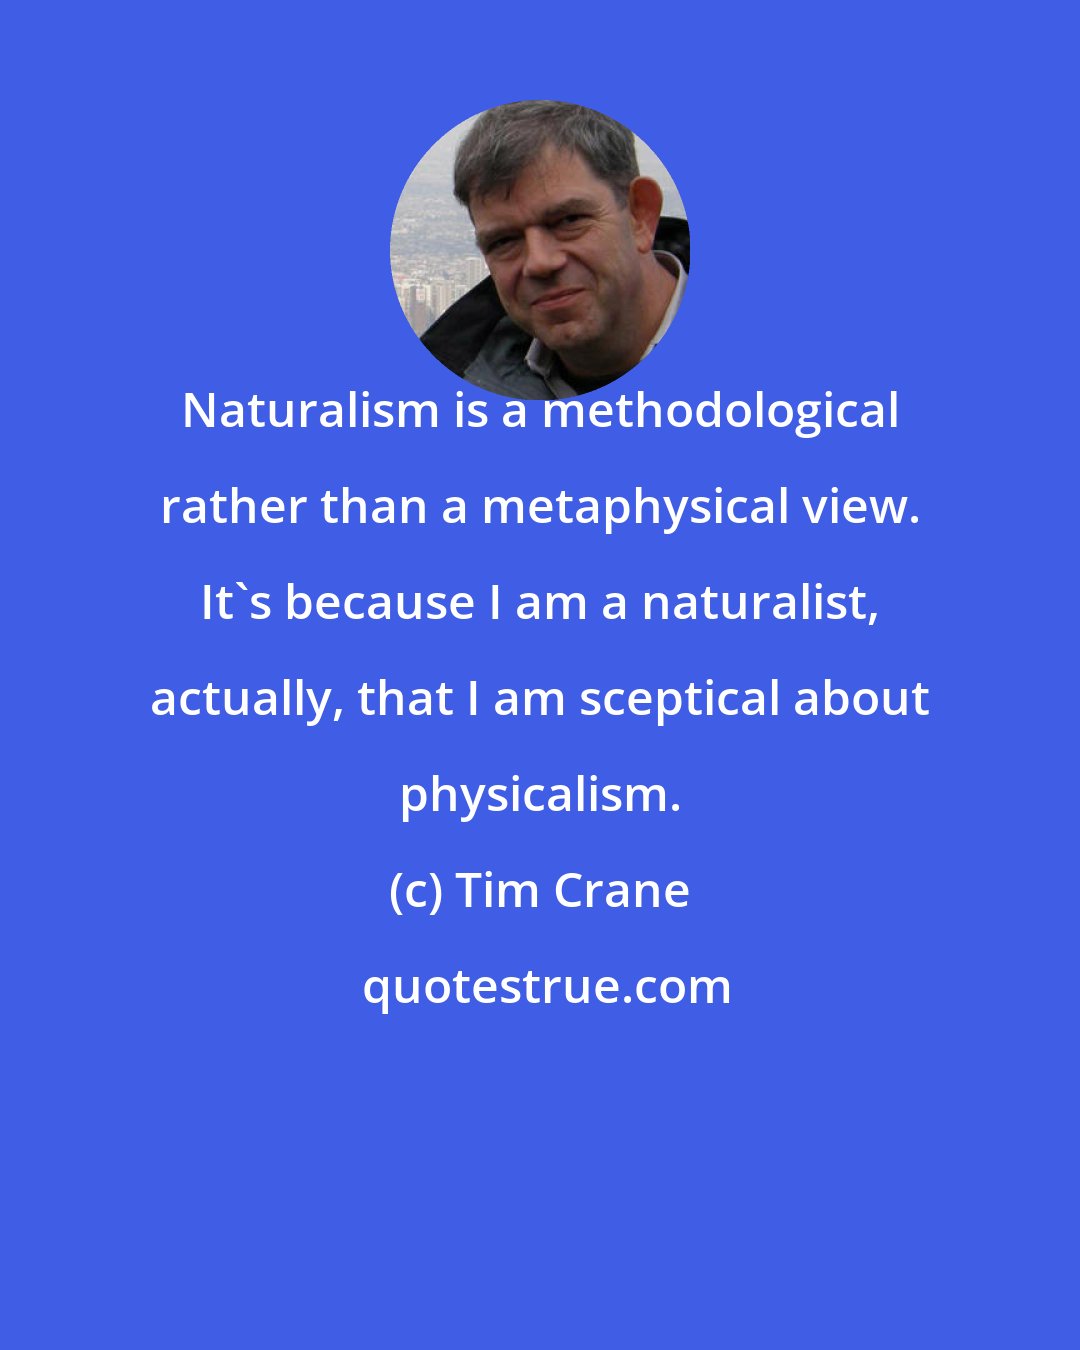 Tim Crane: Naturalism is a methodological rather than a metaphysical view. It's because I am a naturalist, actually, that I am sceptical about physicalism.